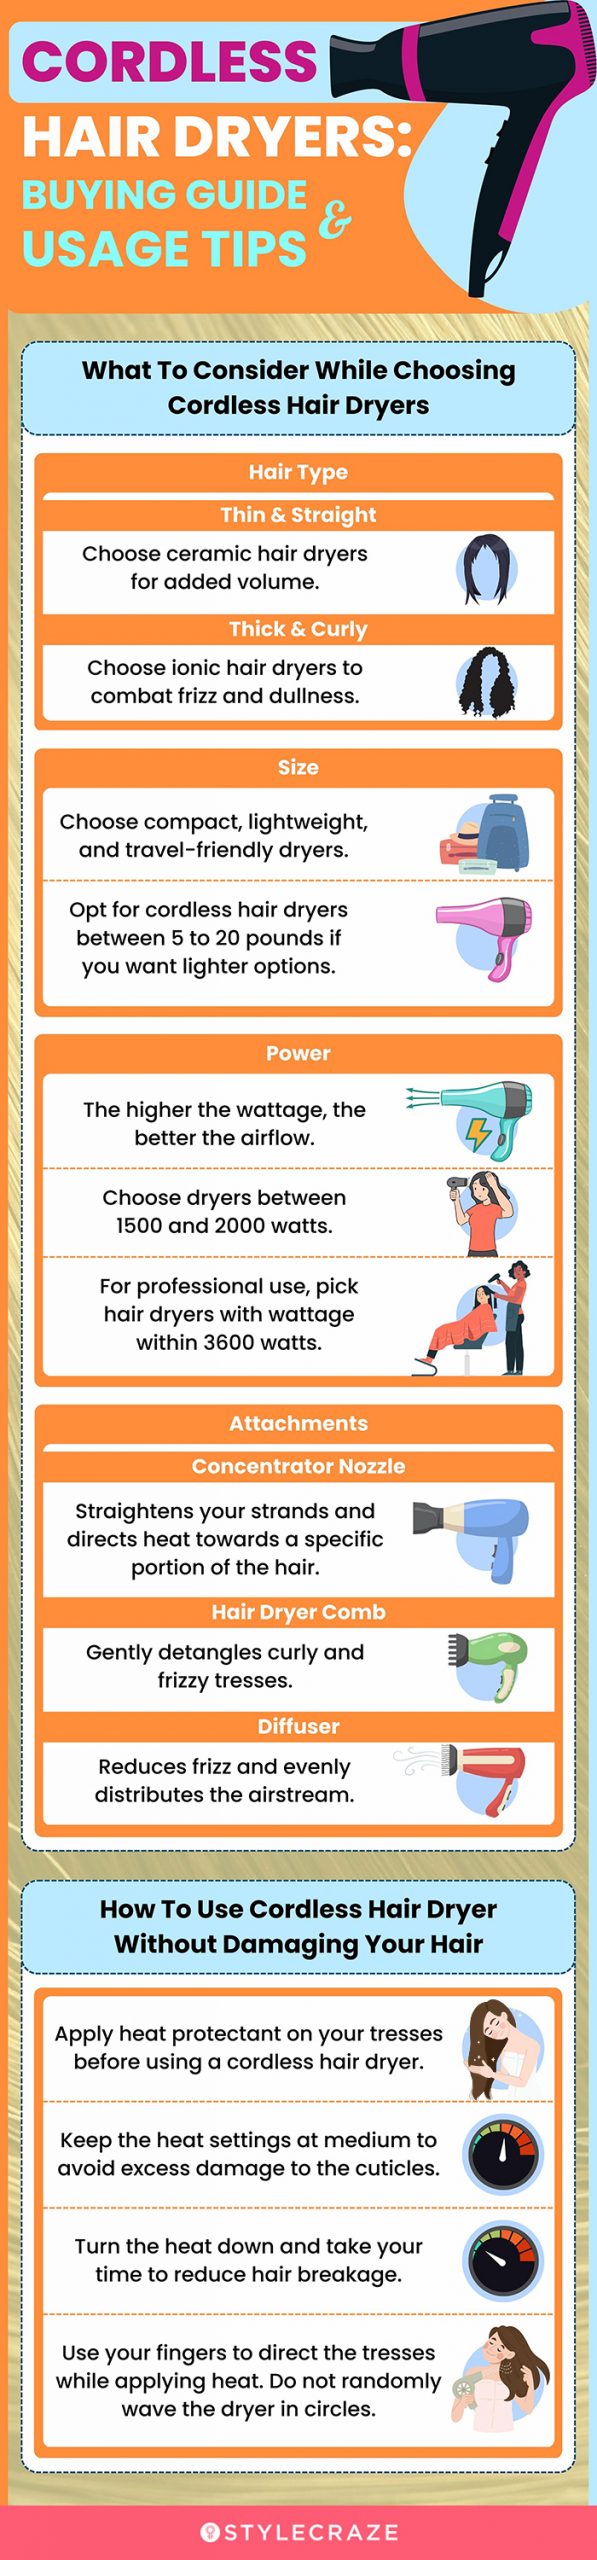 Cordless Hair Dryers: Buying Guide & Usage Tips (infographic)